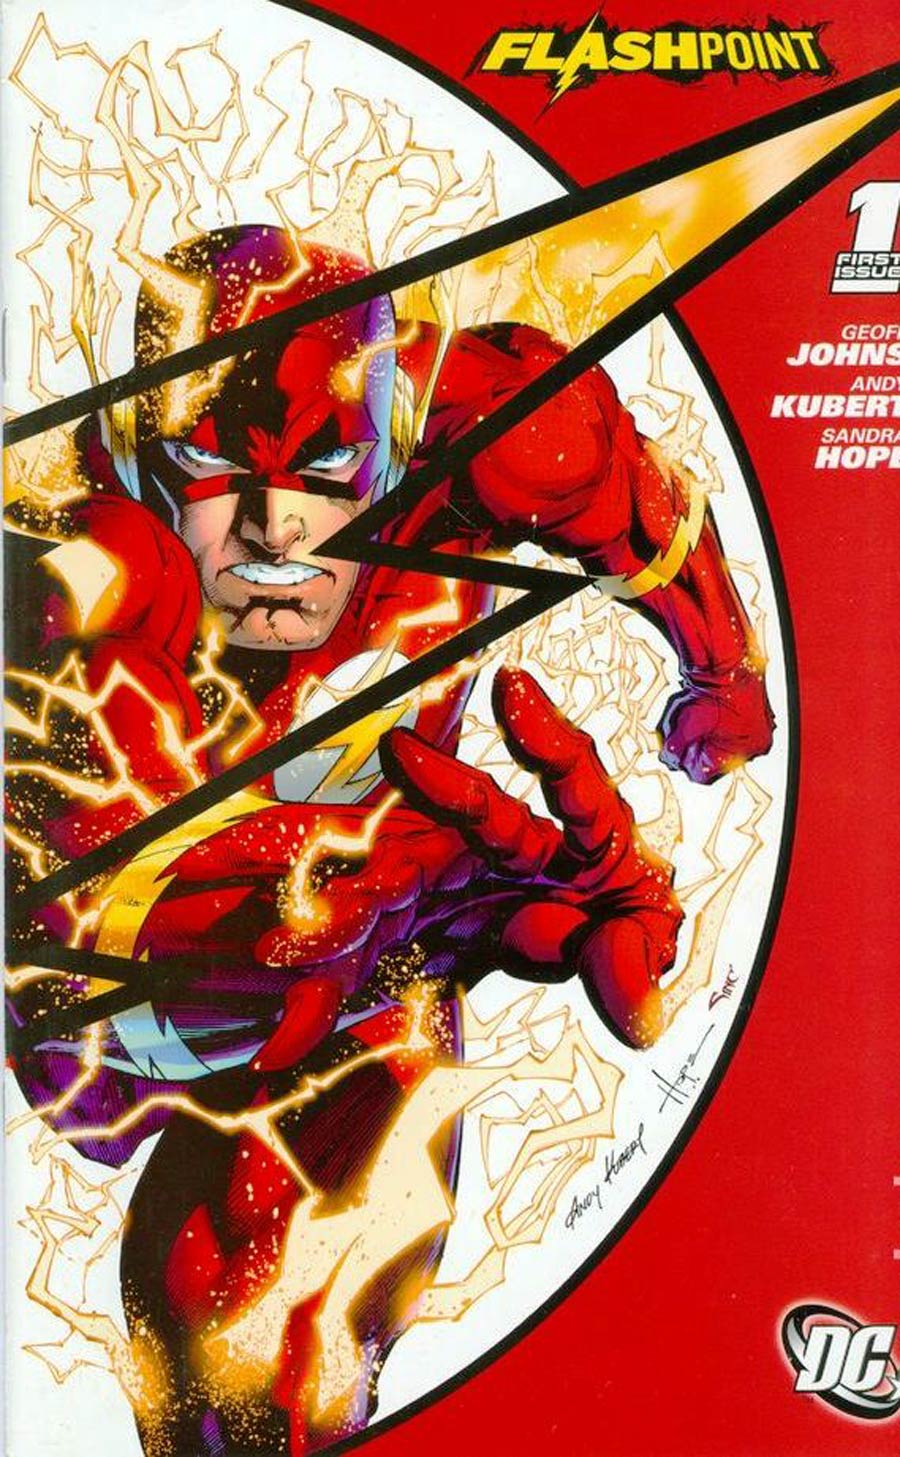 Flashpoint #1 Cover F SDCC Exclusive Variant Wraparound Cover